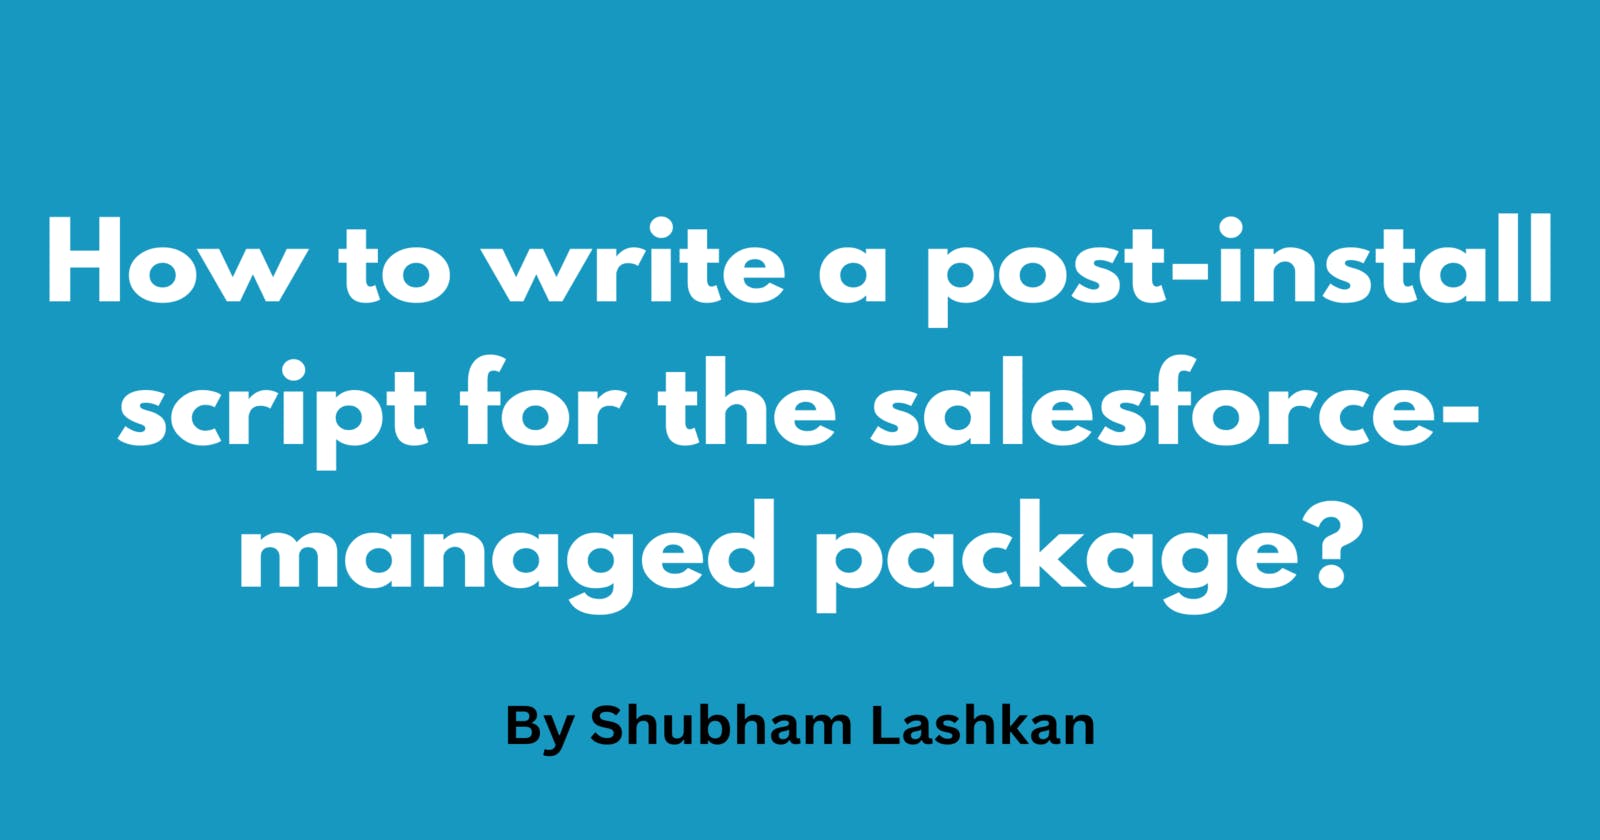 How to write a post-install script for the salesforce-managed package?